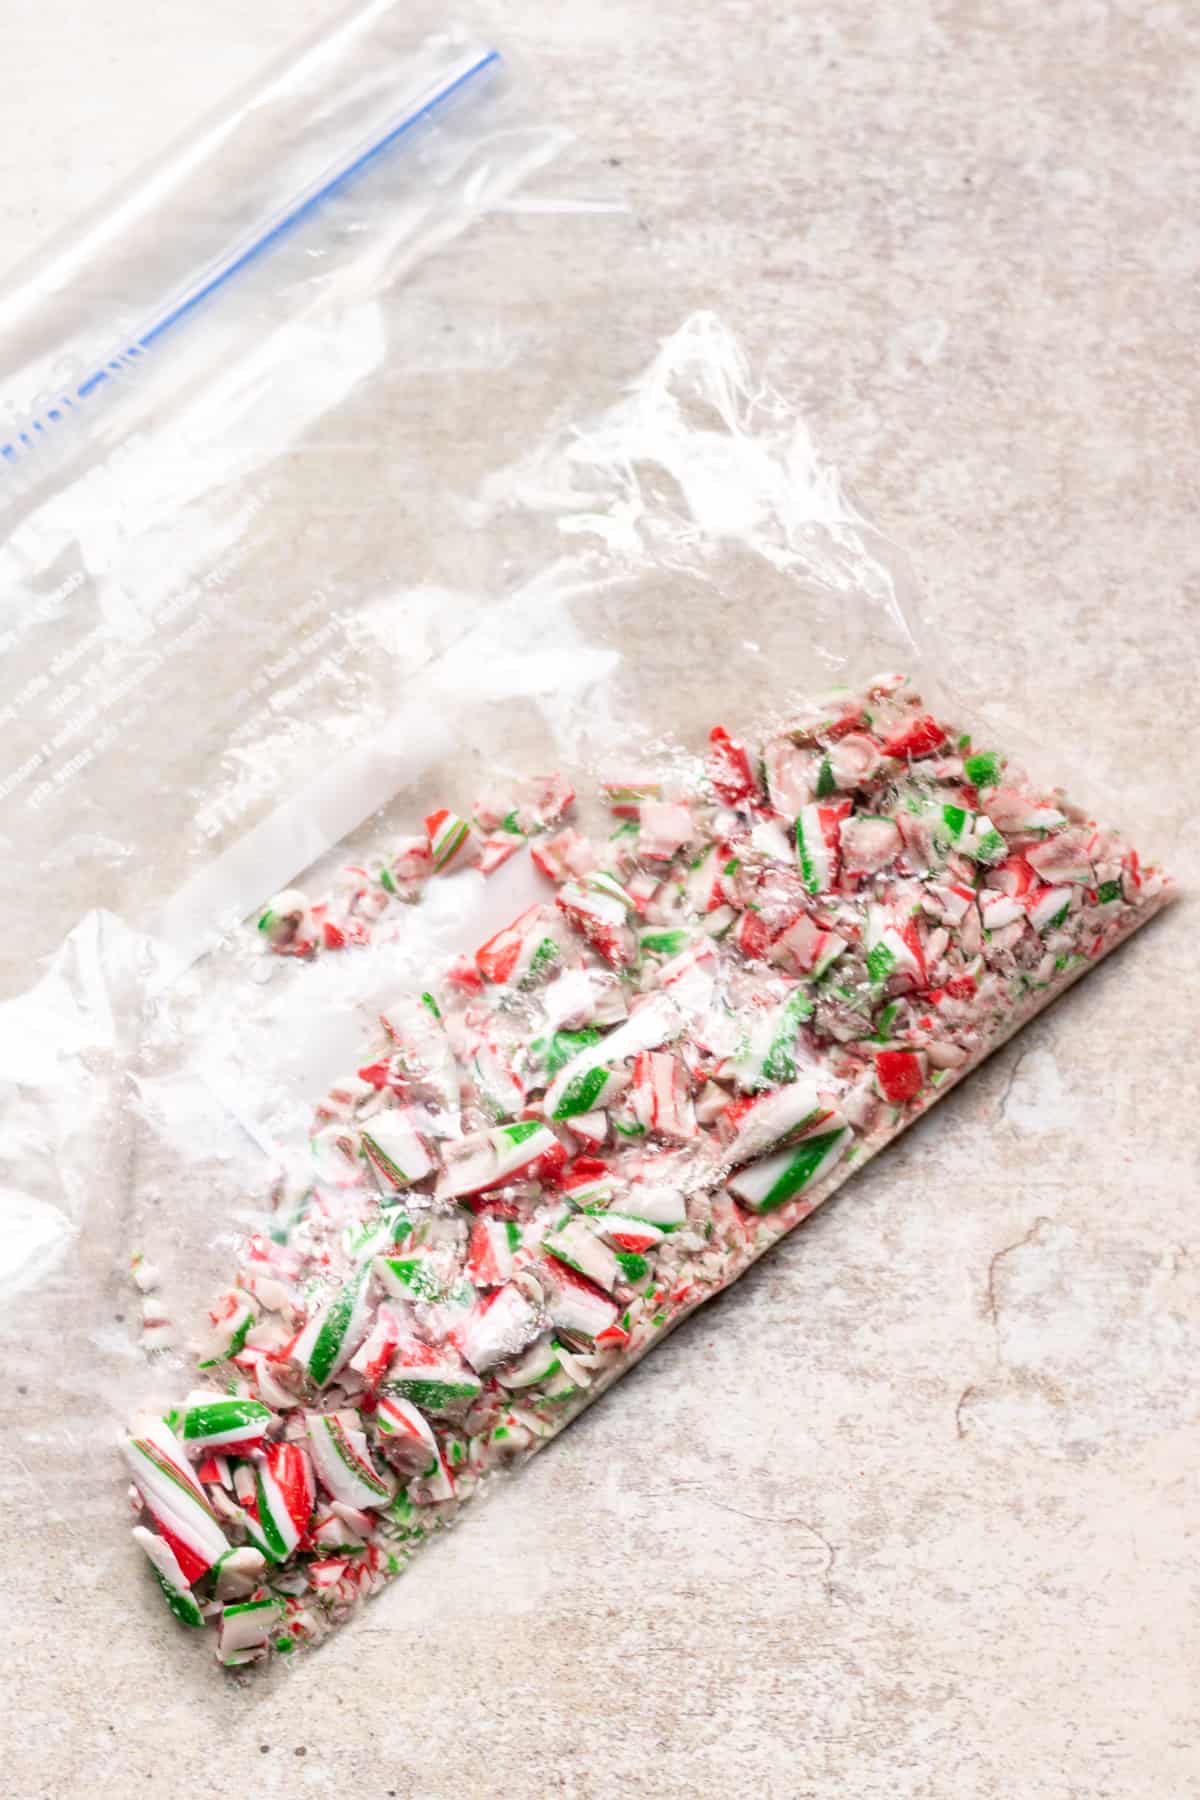 Ziploc bag of crushed candy canes.